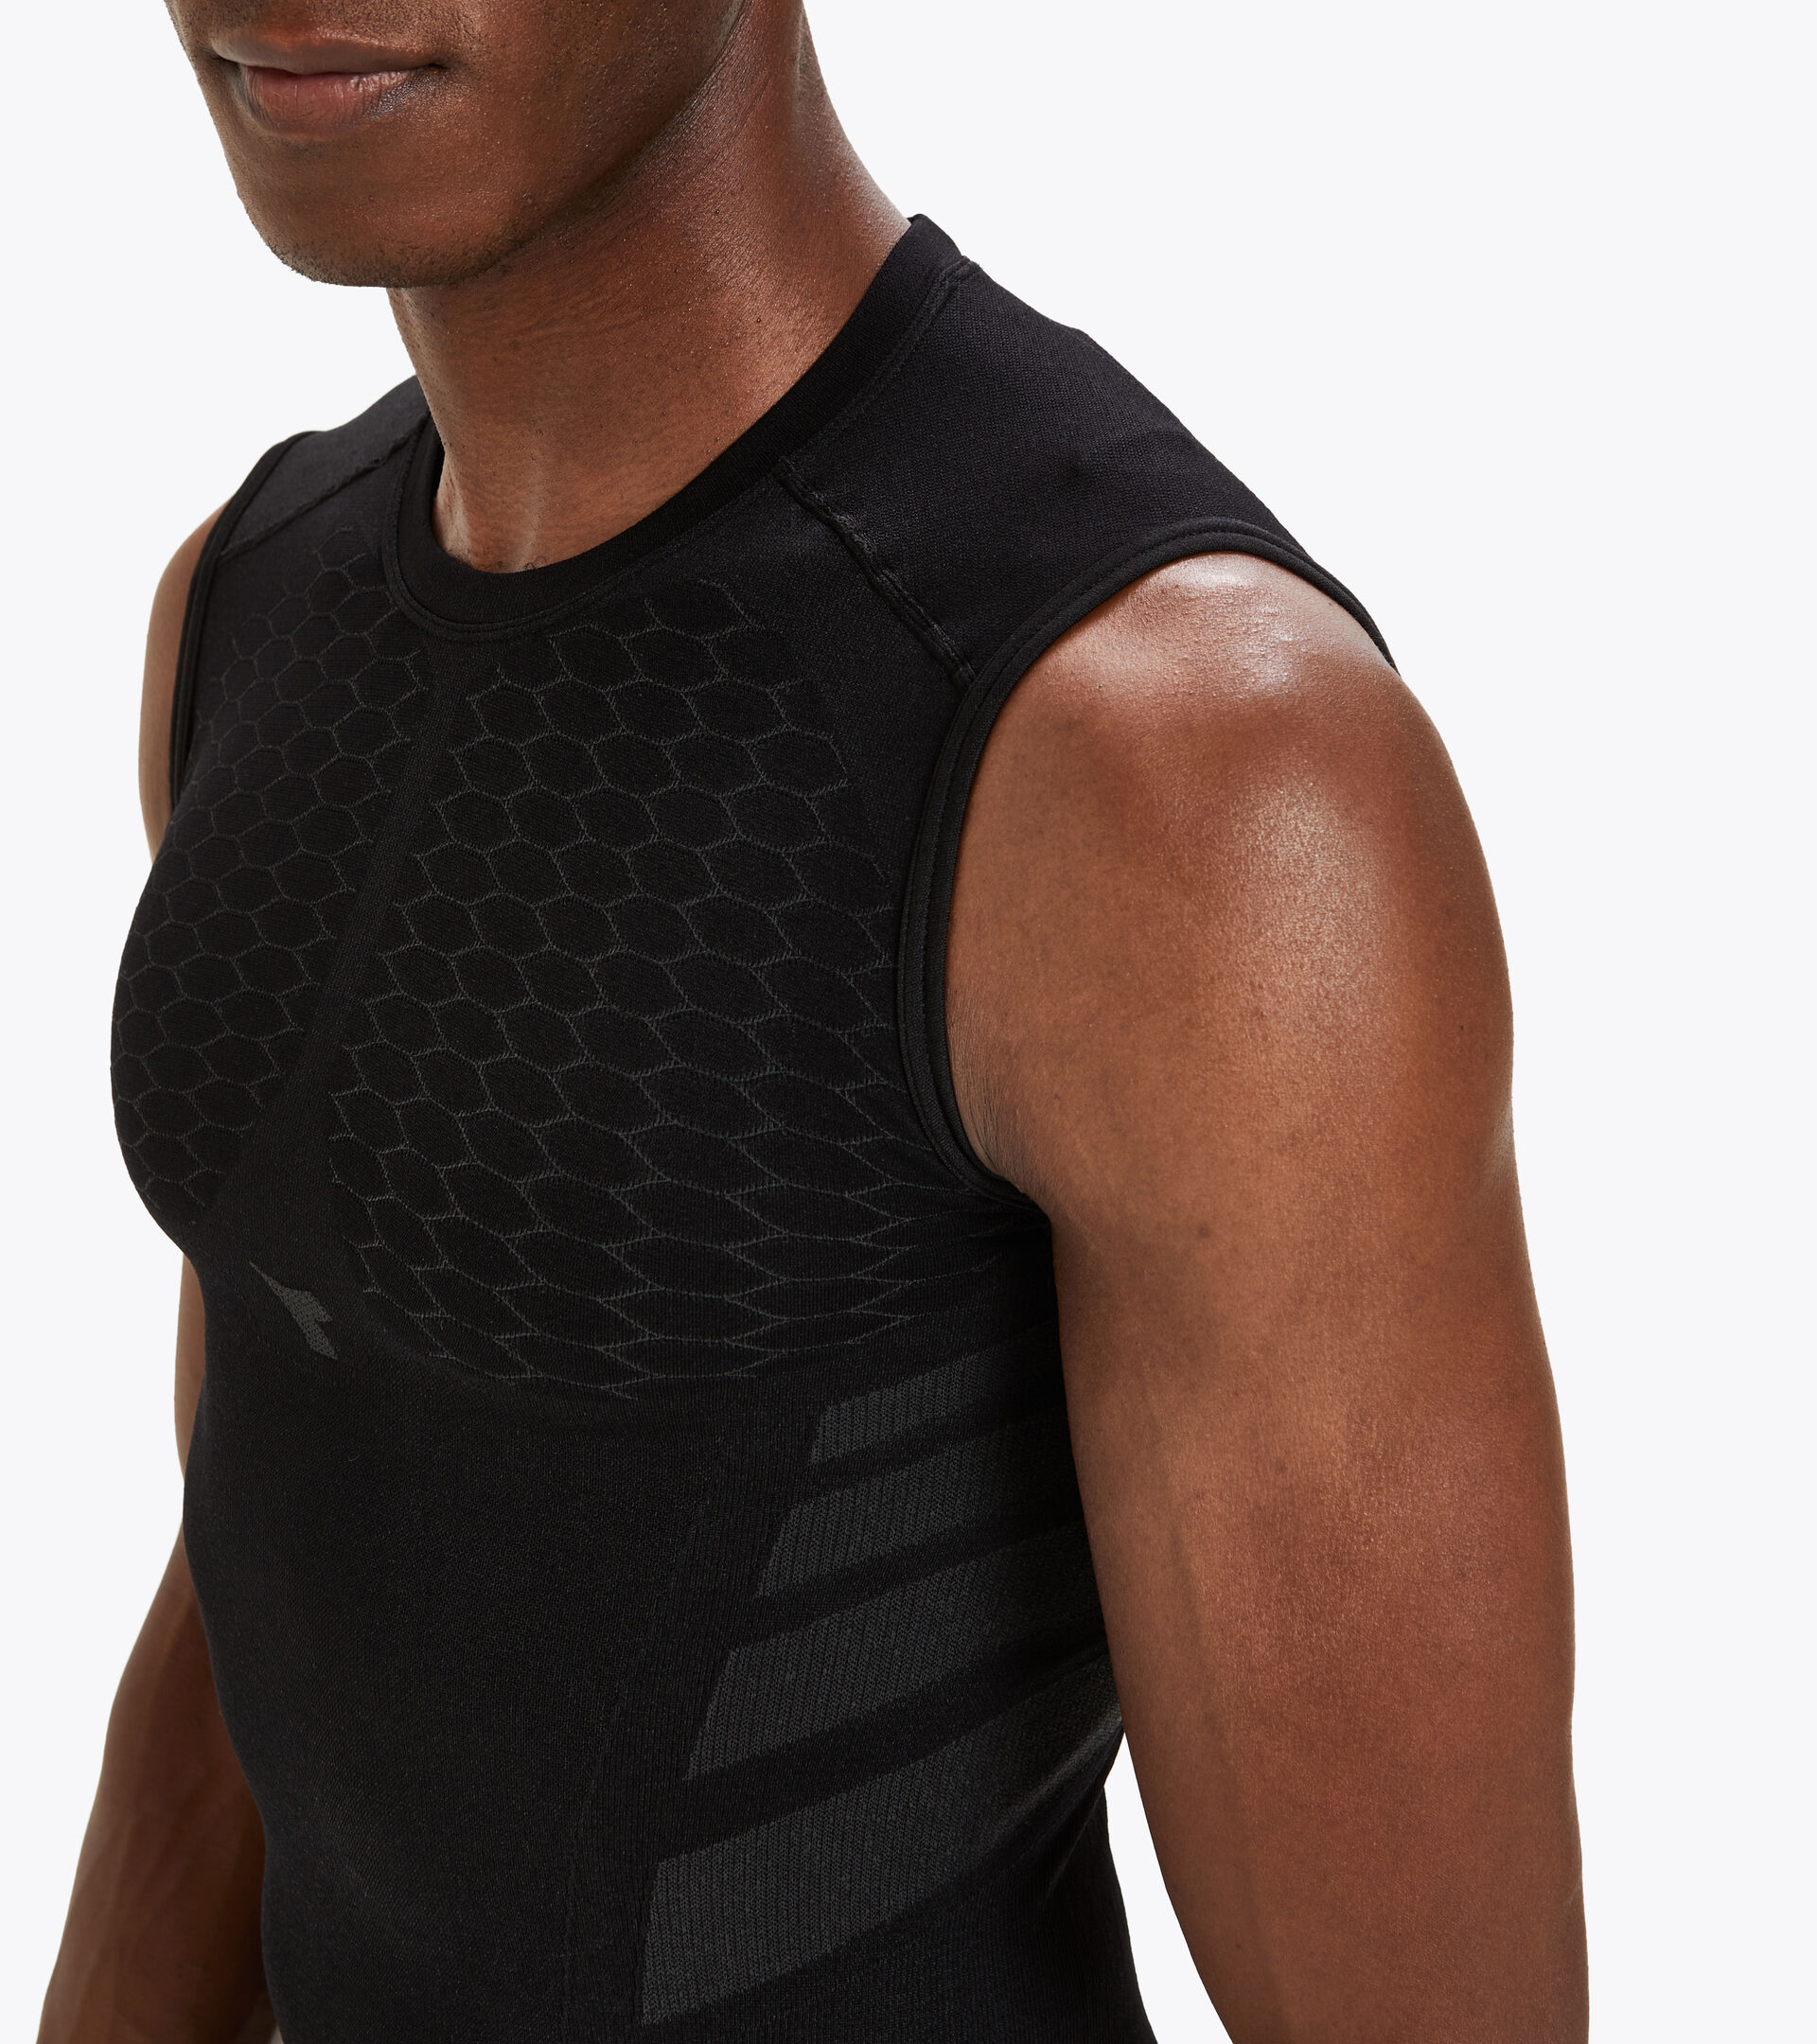 Men's Activewear by   Athletic tank tops, Compression tank